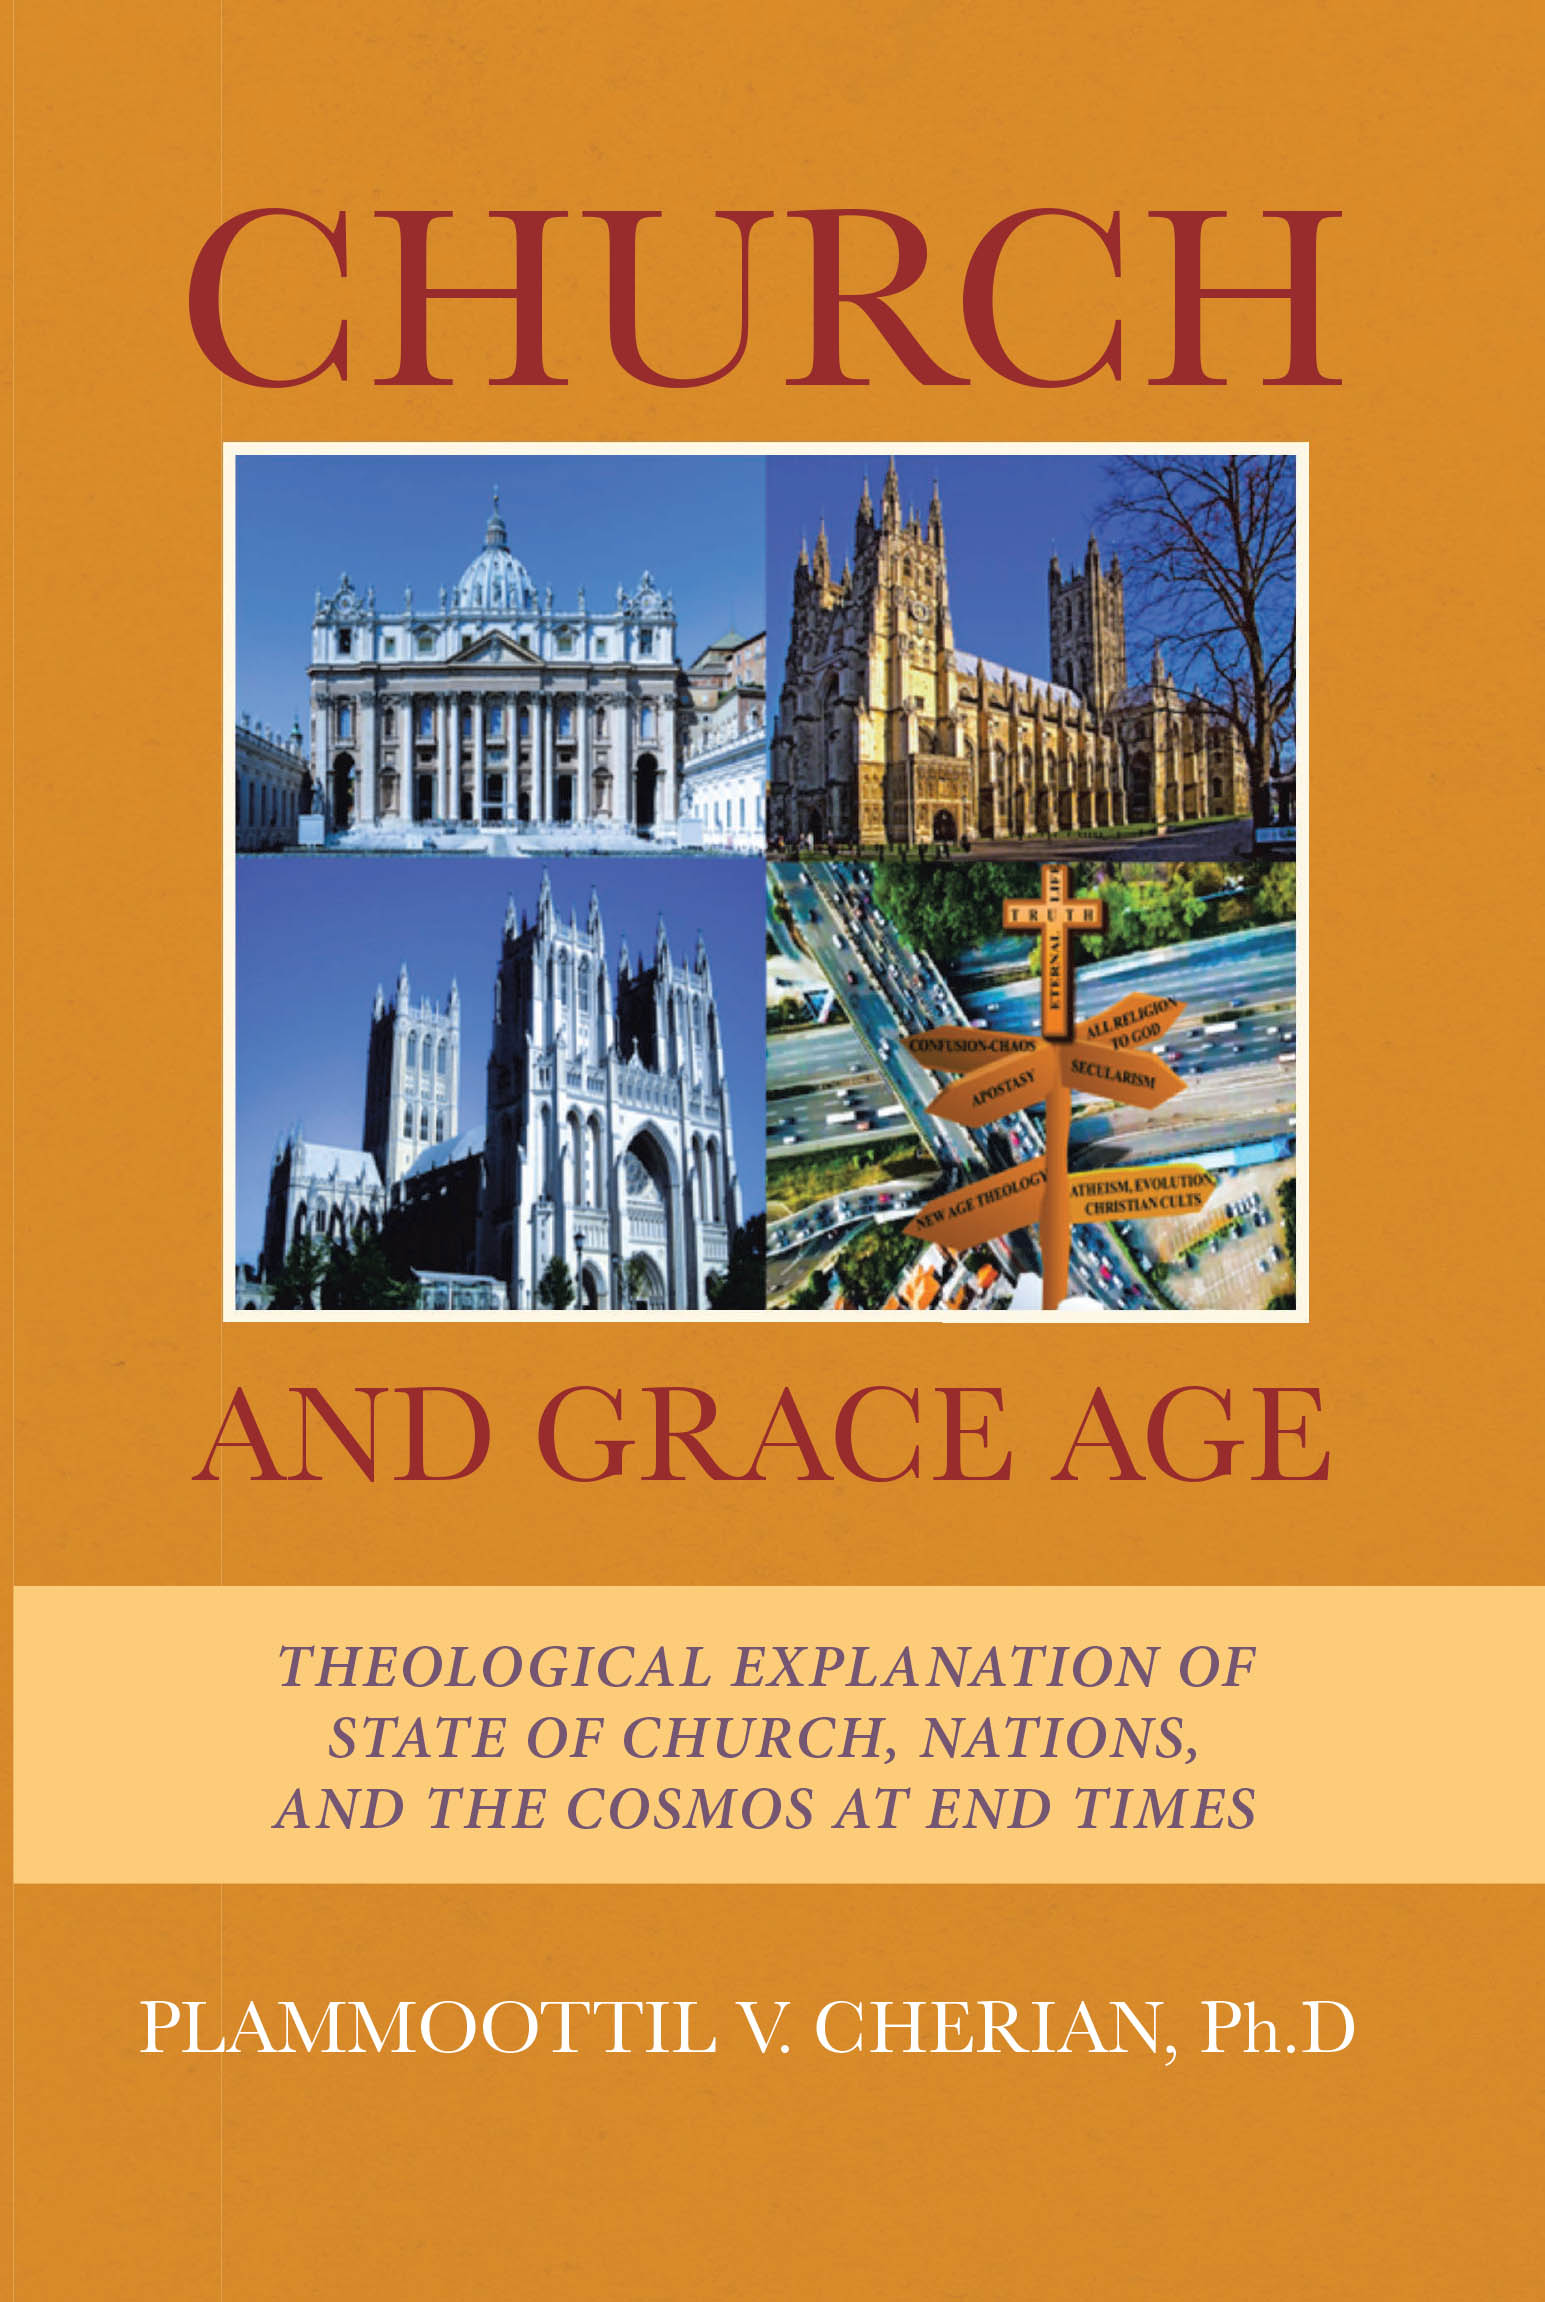 Author Plammoottil V. Cherian, Ph. D’s New Book, “Church And Grace Age: Theological Explanation of State of Church, Nations, and the Cosmos at End Times,” is Released